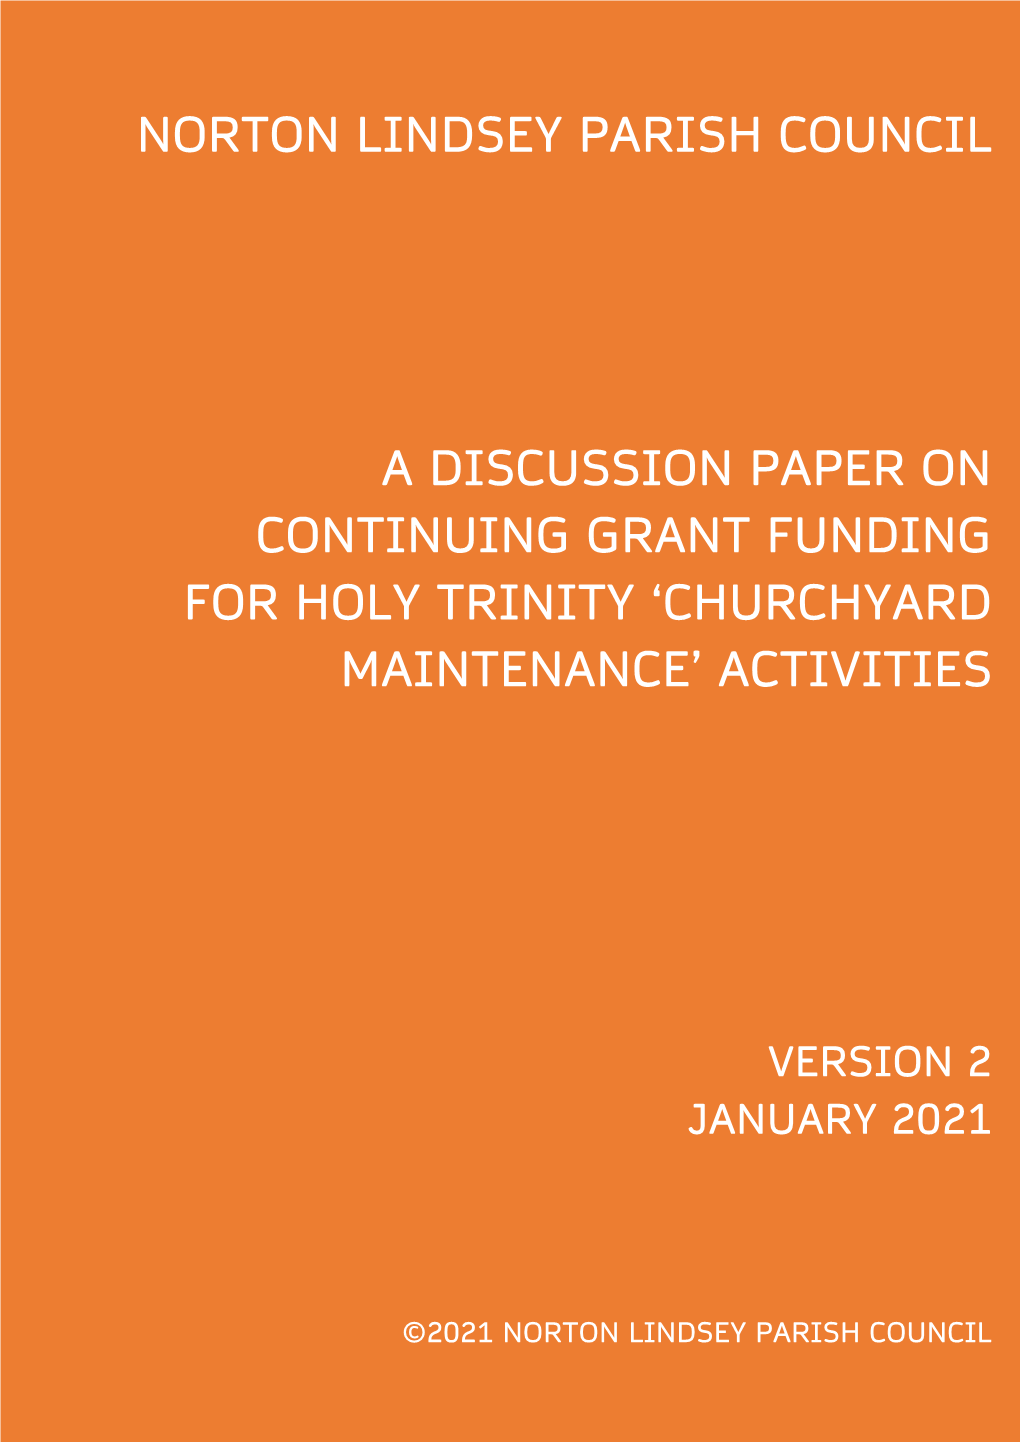 A Discussion Paper on Continuing Grant Funding for Holy Trinity ‘Churchyard Maintenance’ Activities